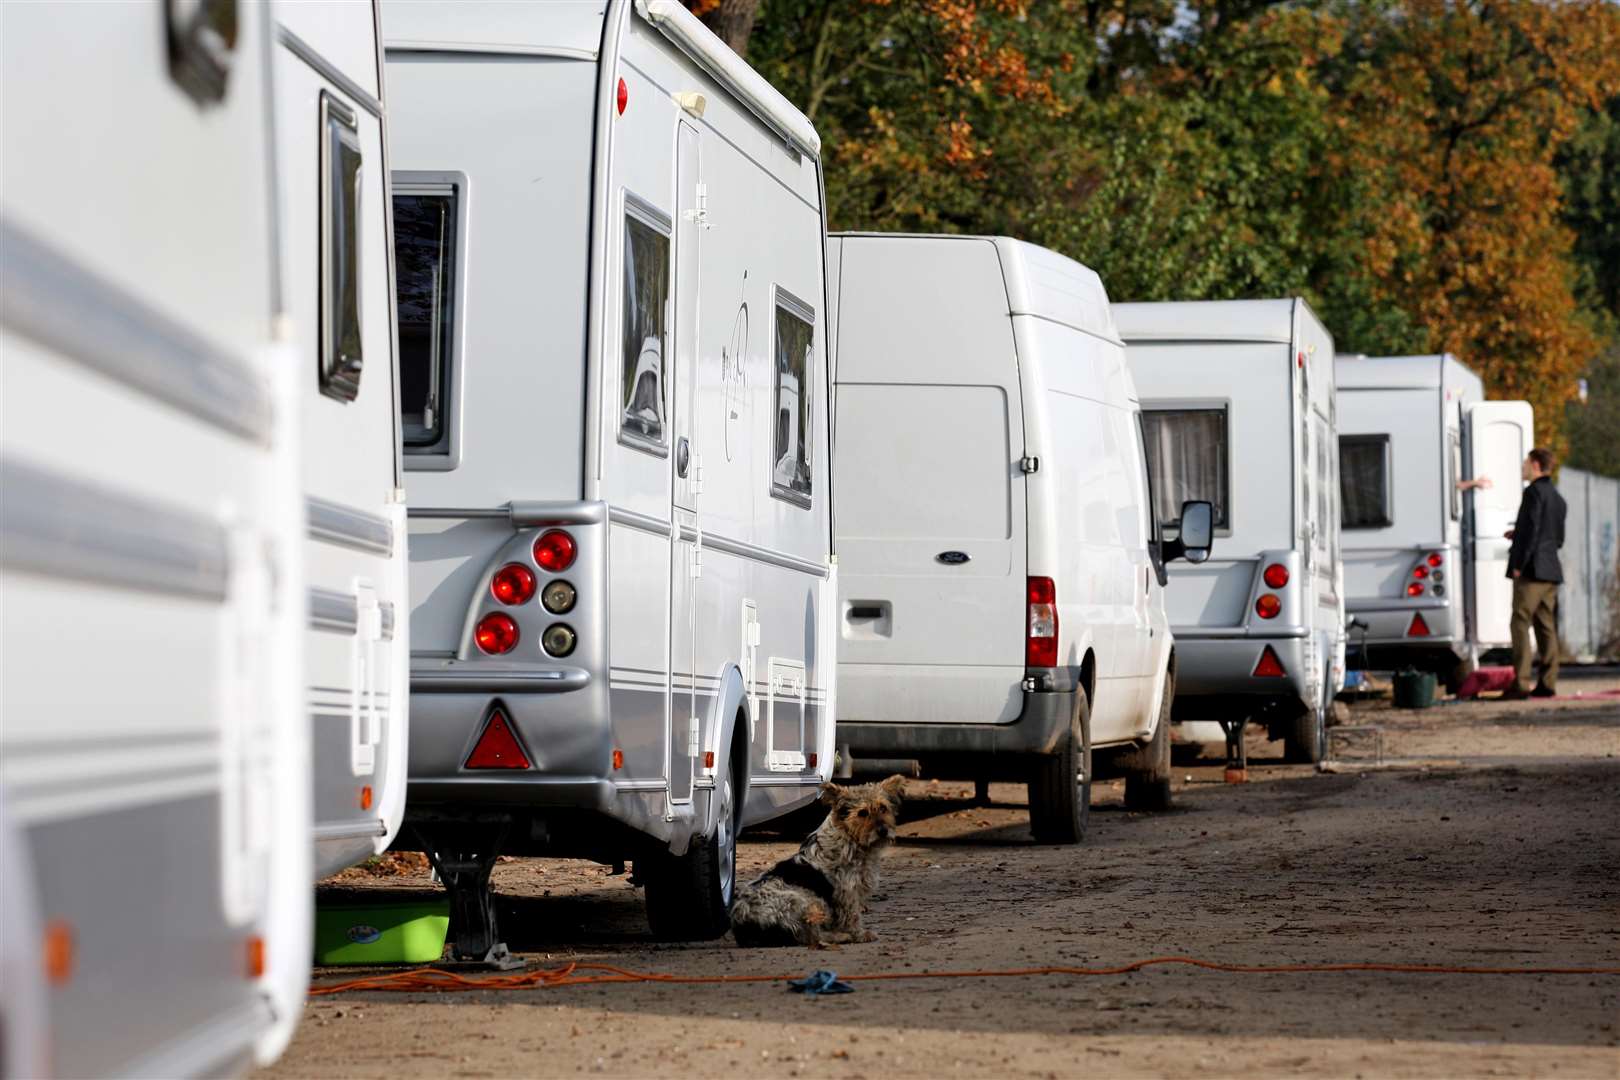 Almost 300 caravans were encamped without planning permission in Kent earlier this year.